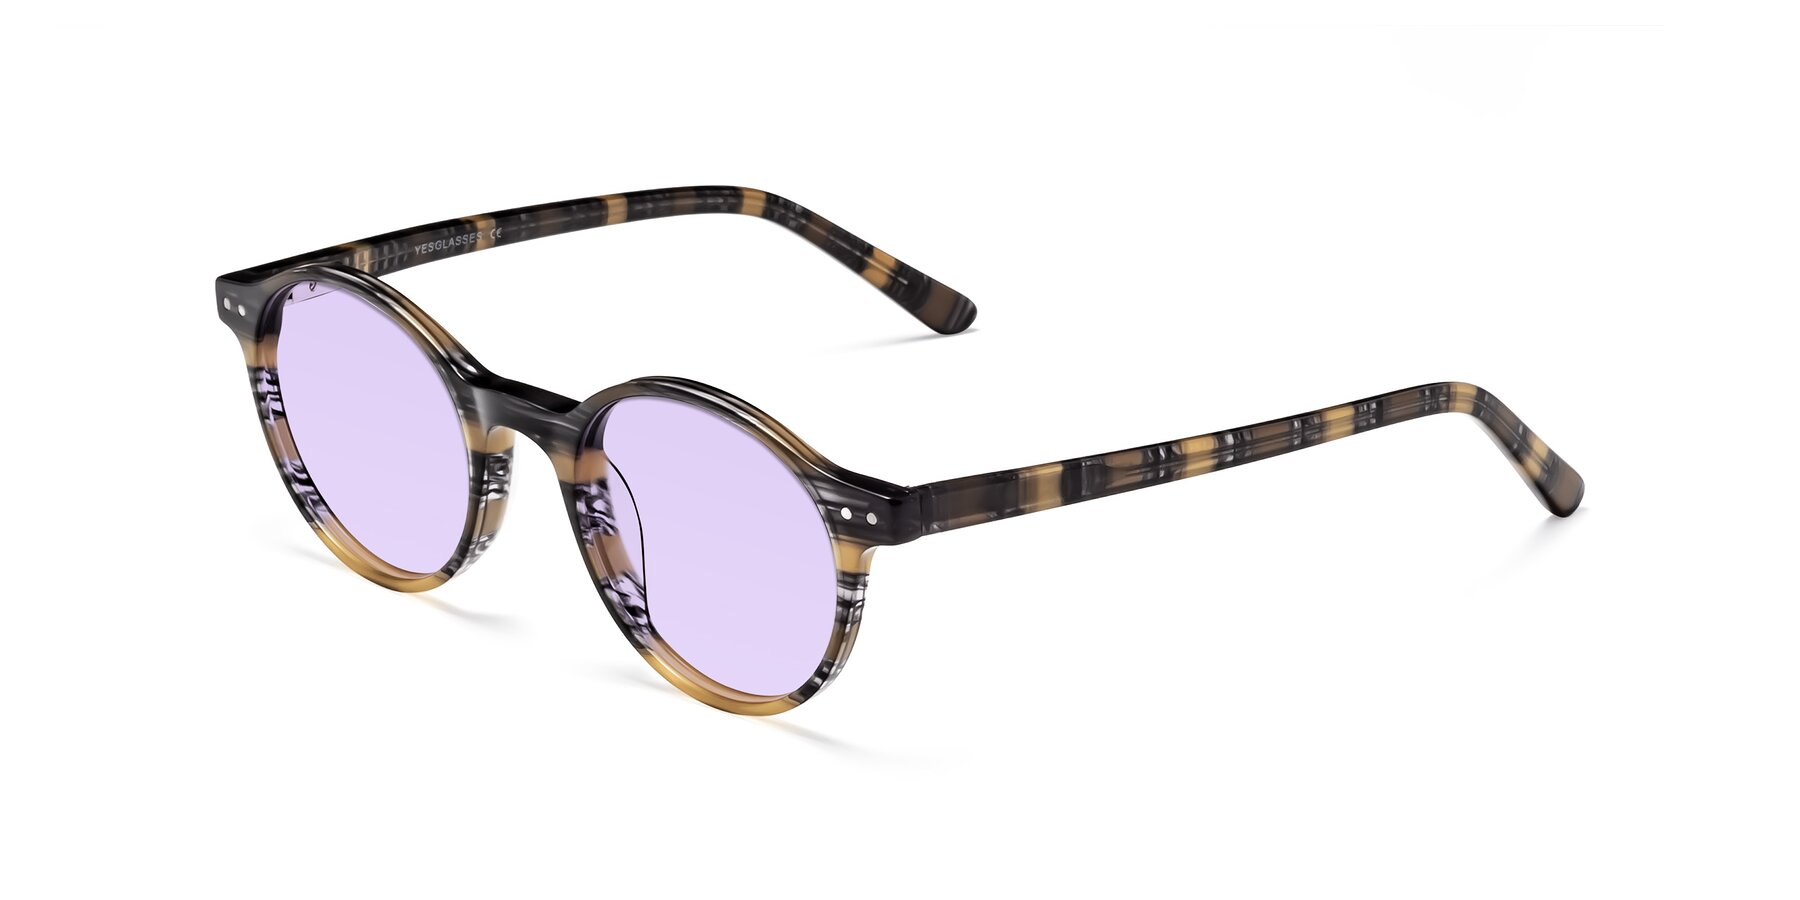 Angle of Jardi in Stripe Yellow Grey with Light Purple Tinted Lenses